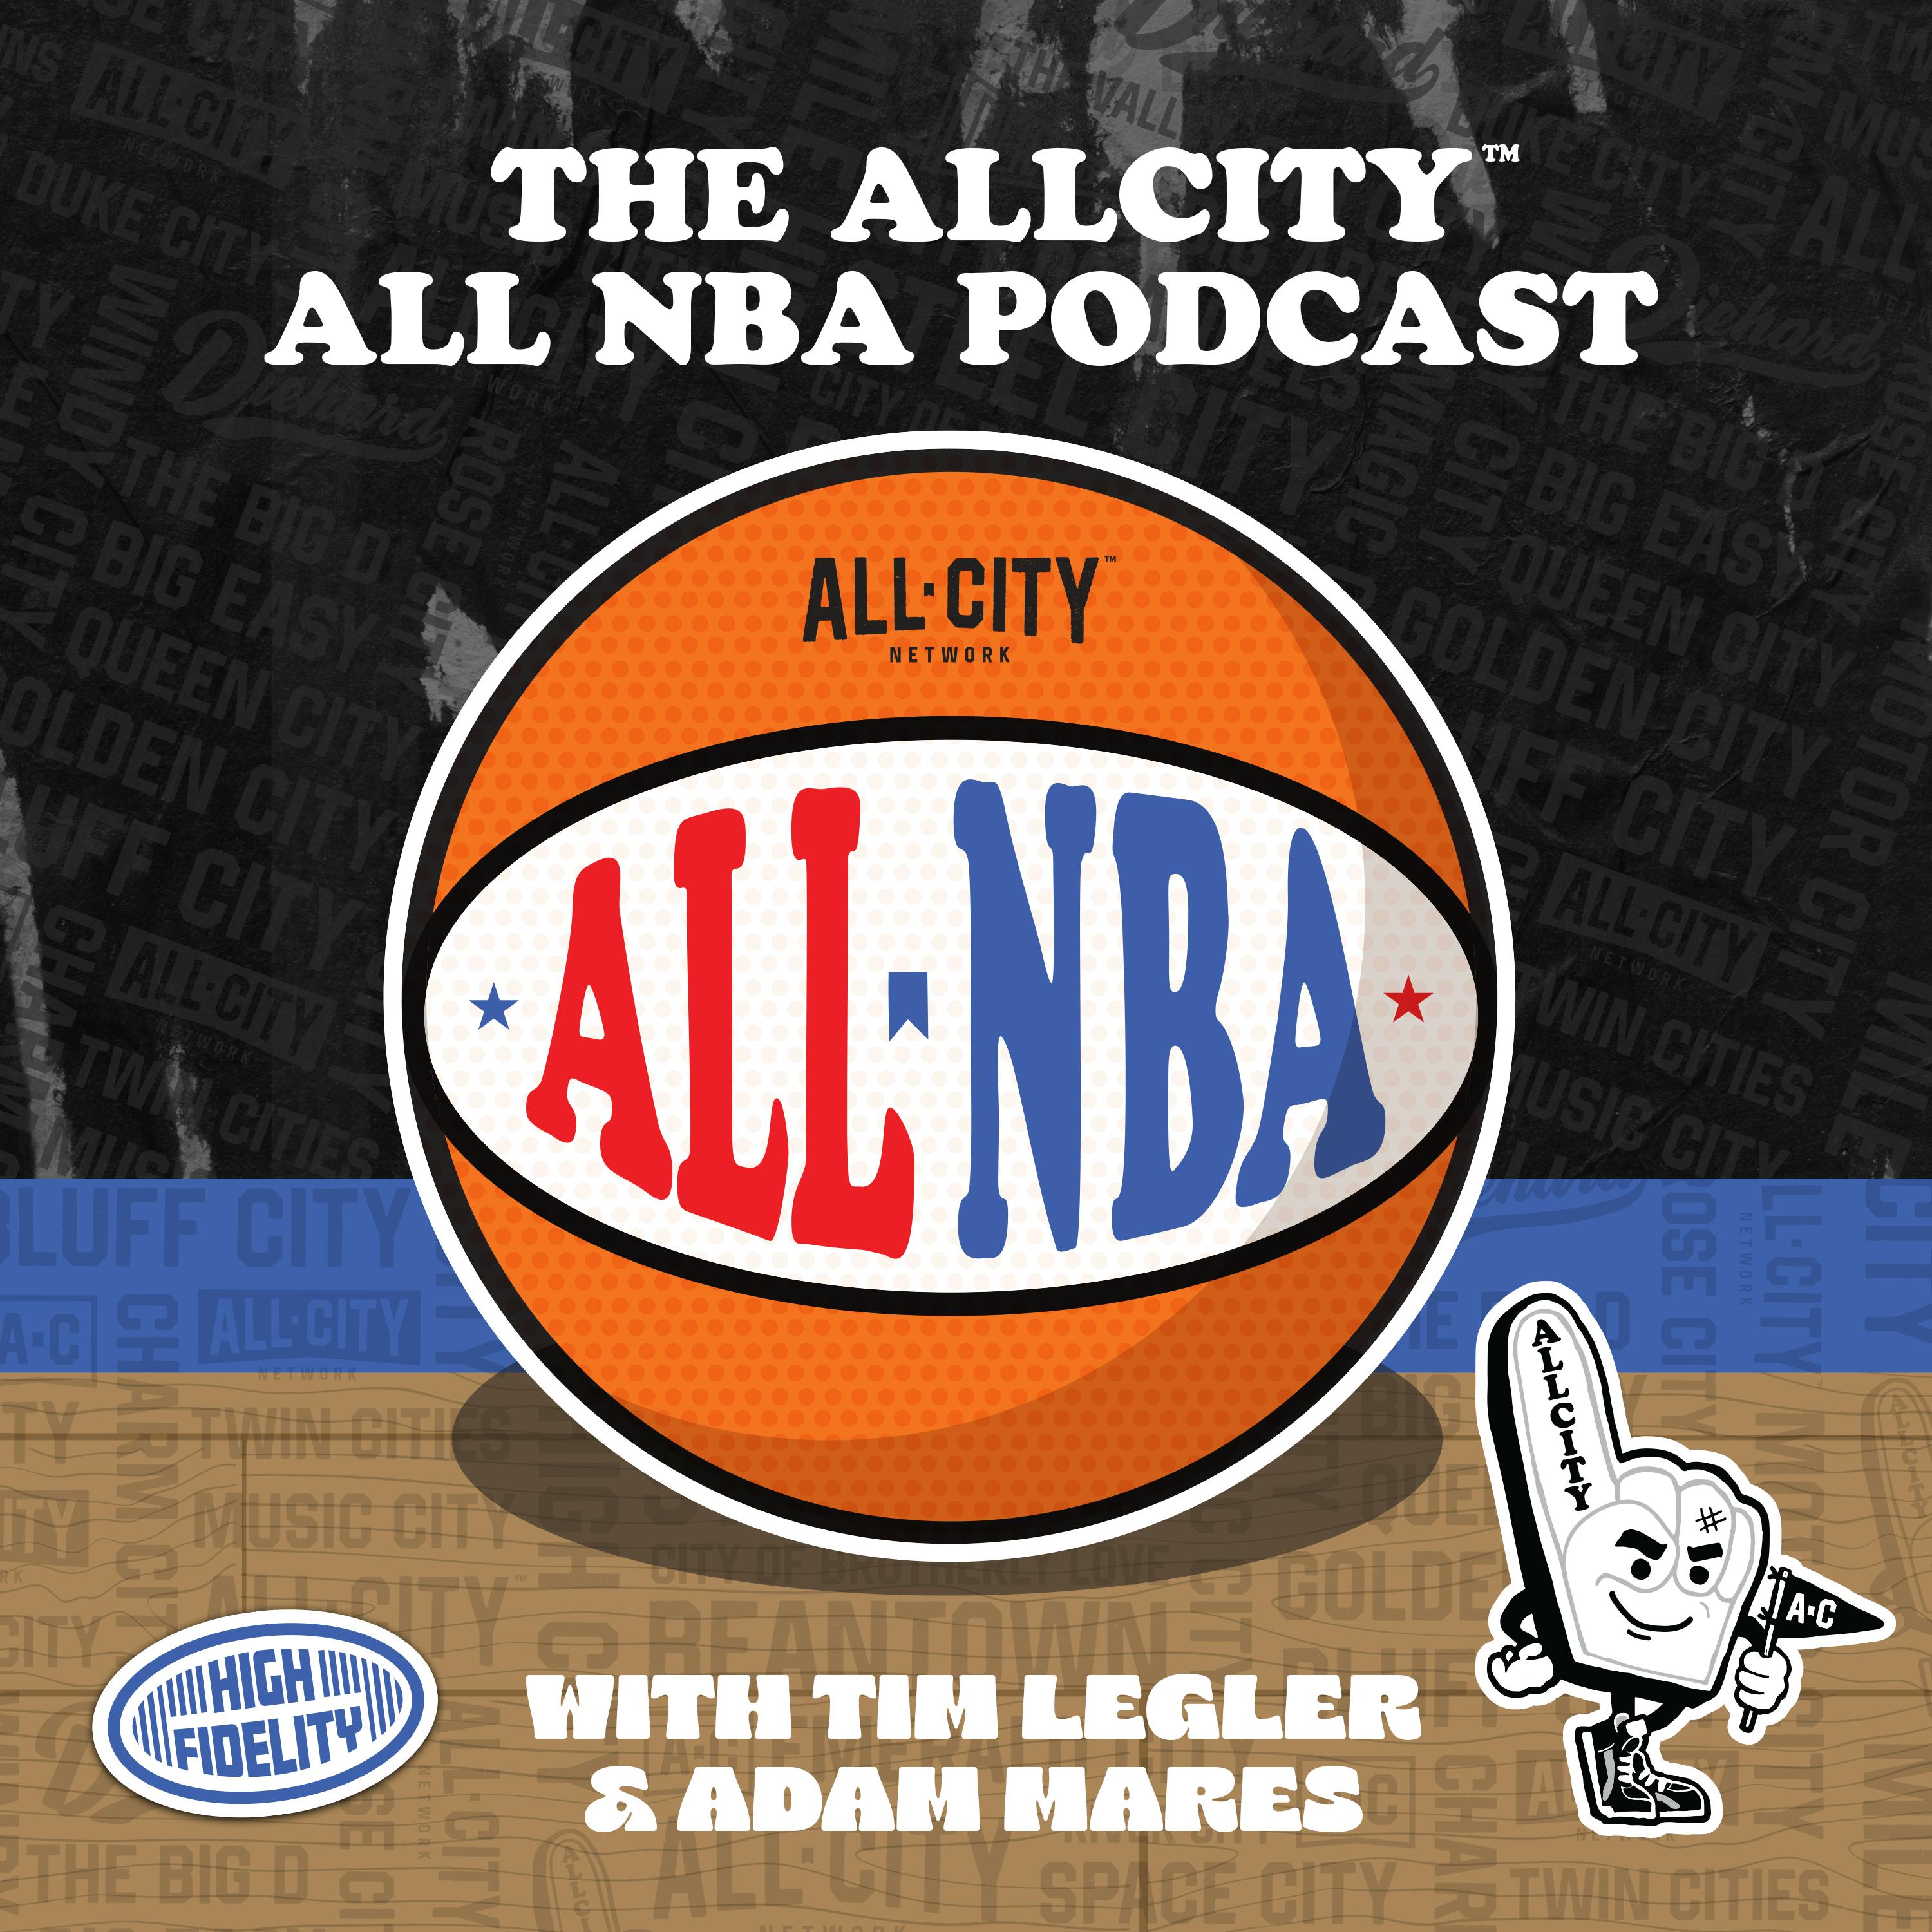 The ALL NBA Podcast: Mavericks-Clippers, Cavaliers-Magic | NBA playoff preview